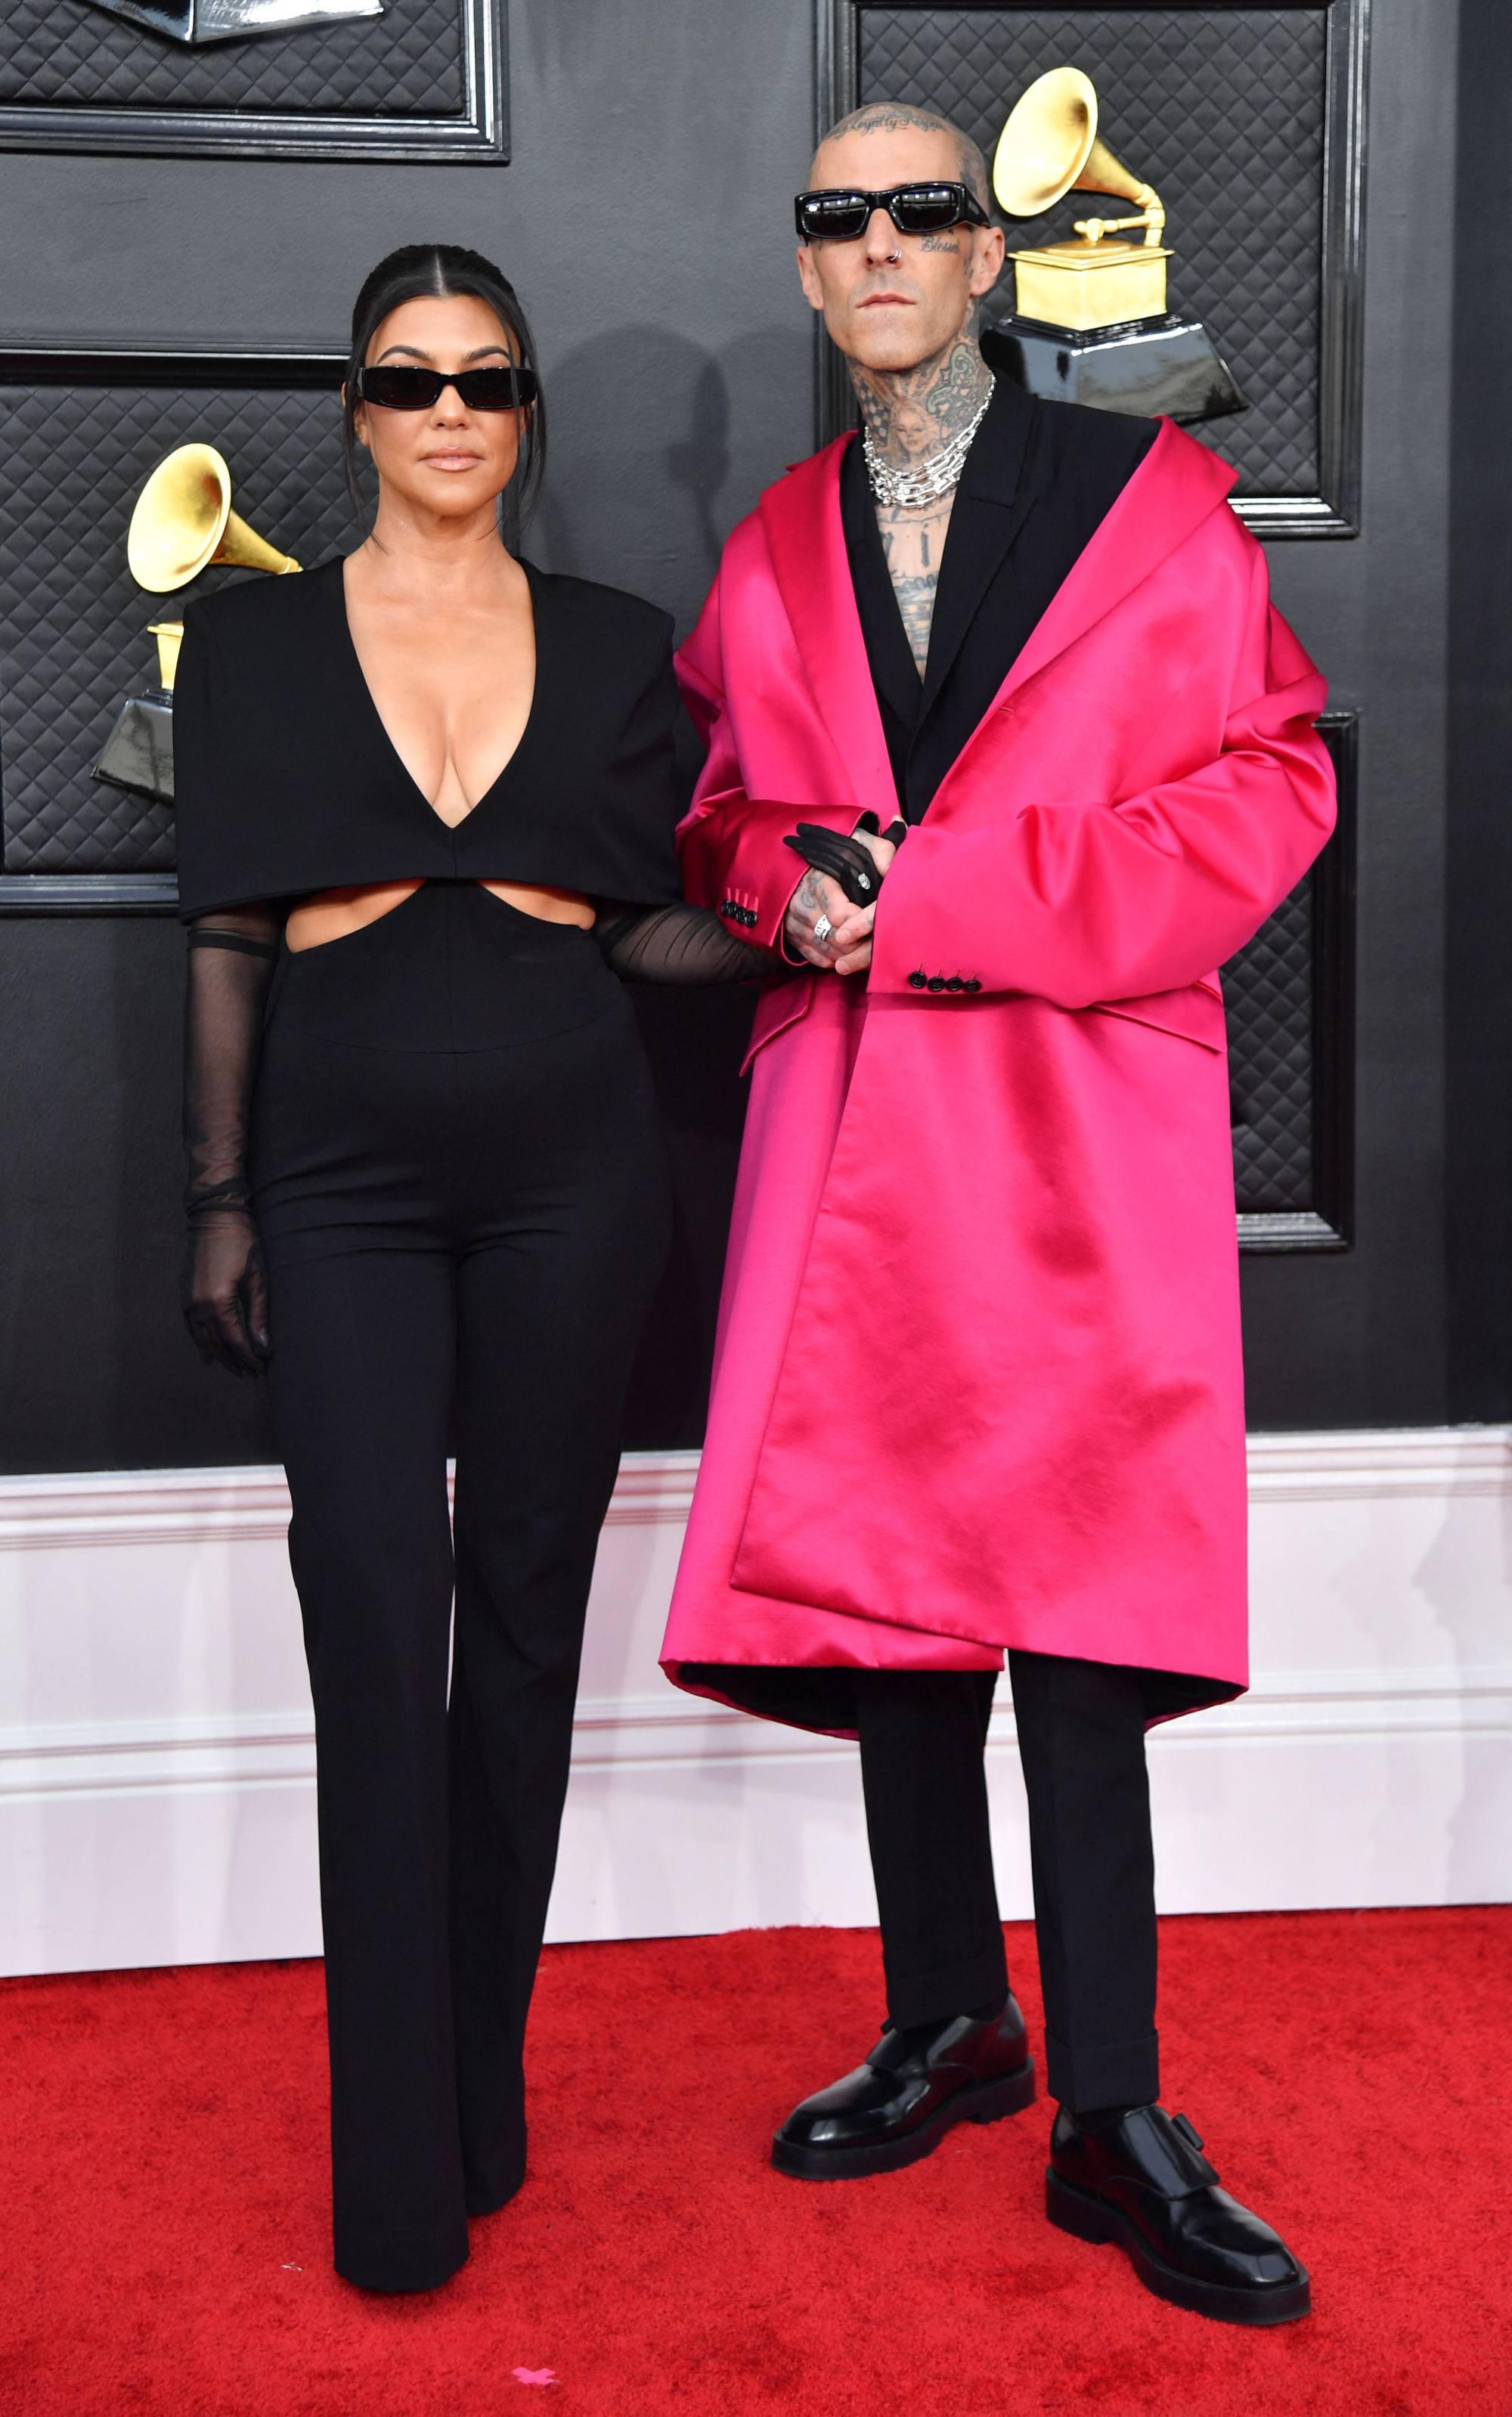 Kourtney Kardashian and musician Travis Barker didn’t excite with their outfits, despite the hot pink. Photo: AFP